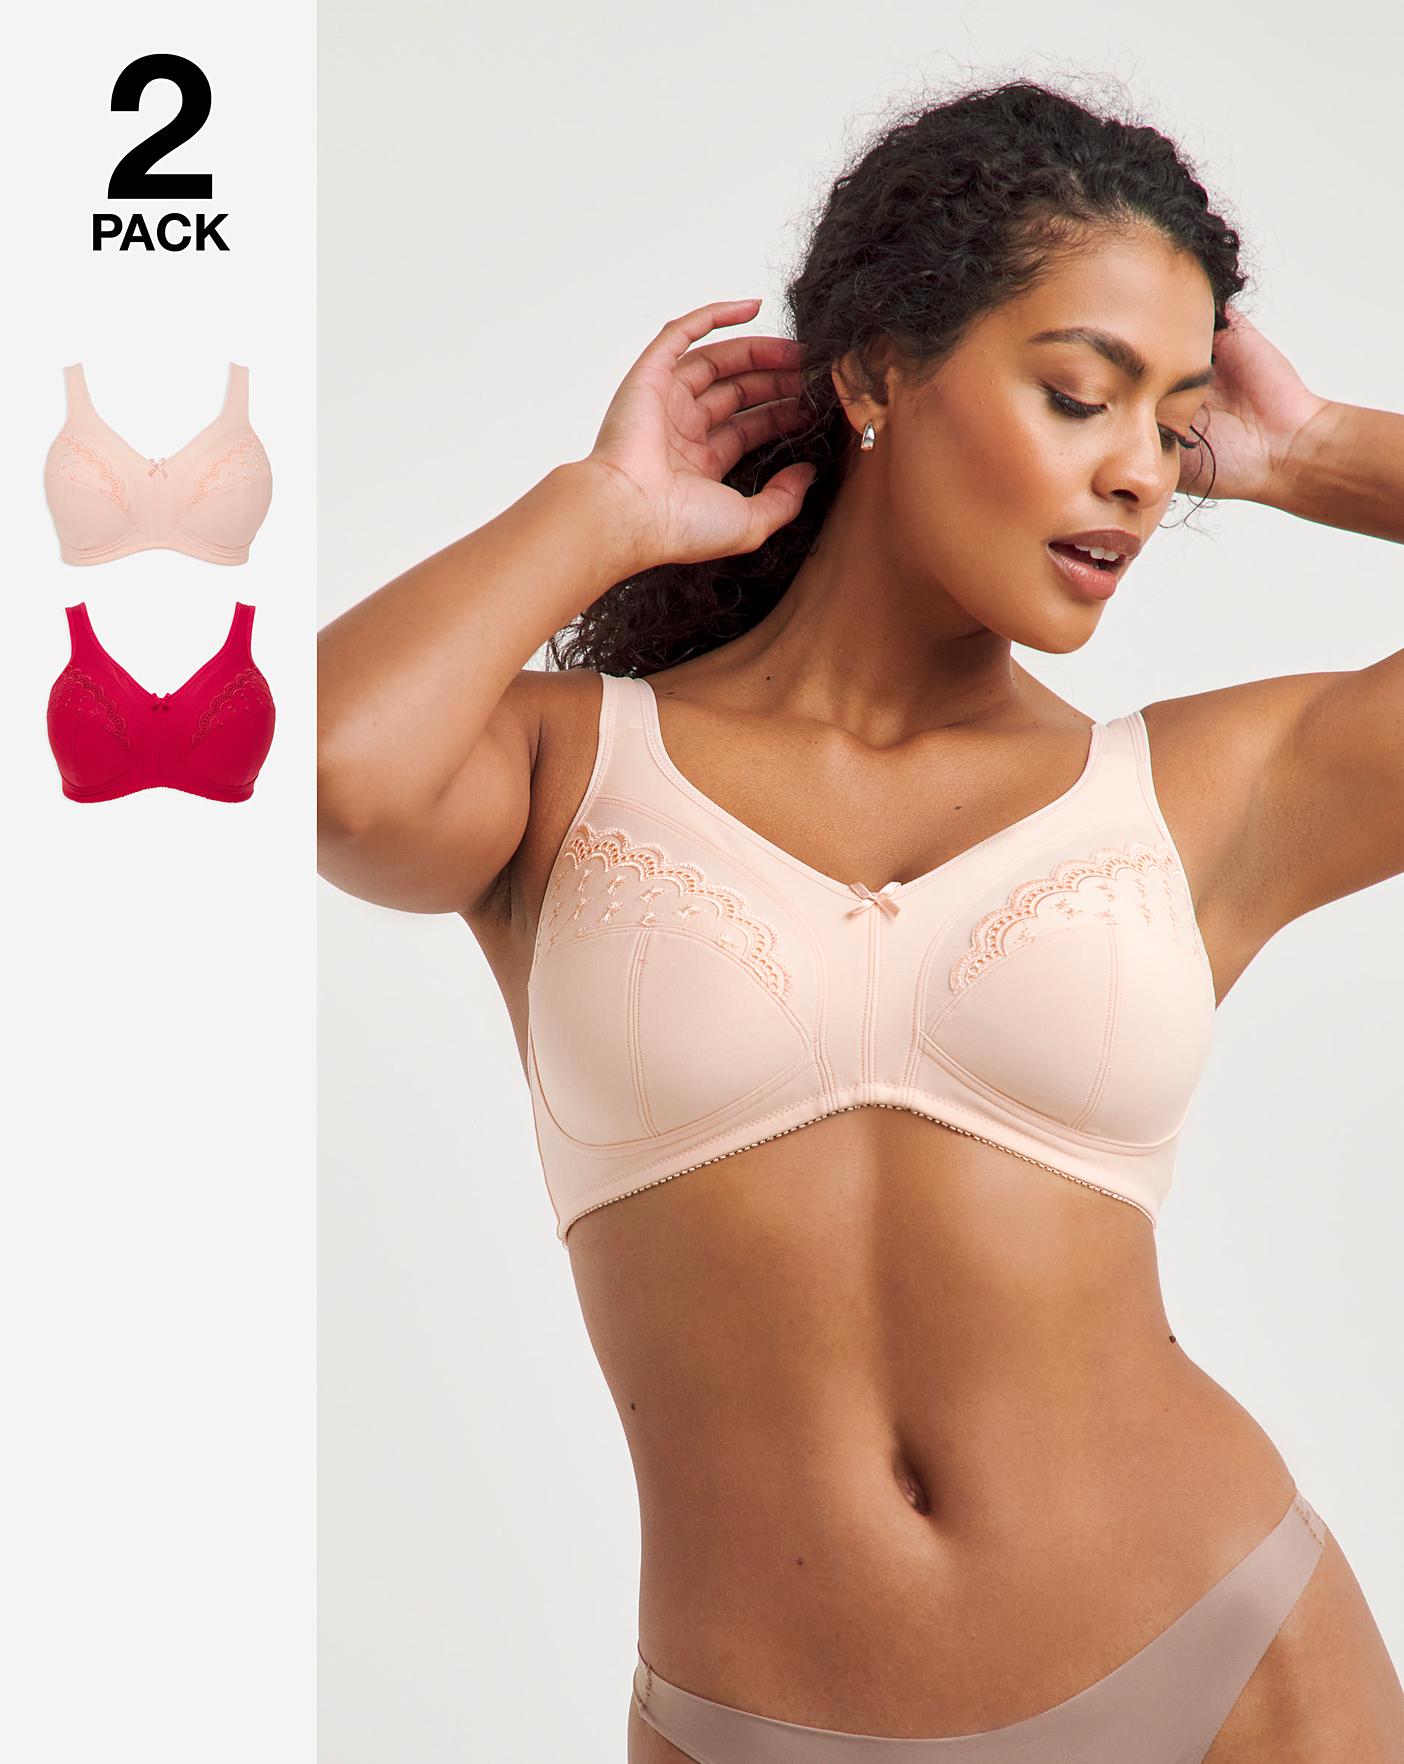 2 Pack Lace Trim Non Wired Nursing Bras, Lingerie